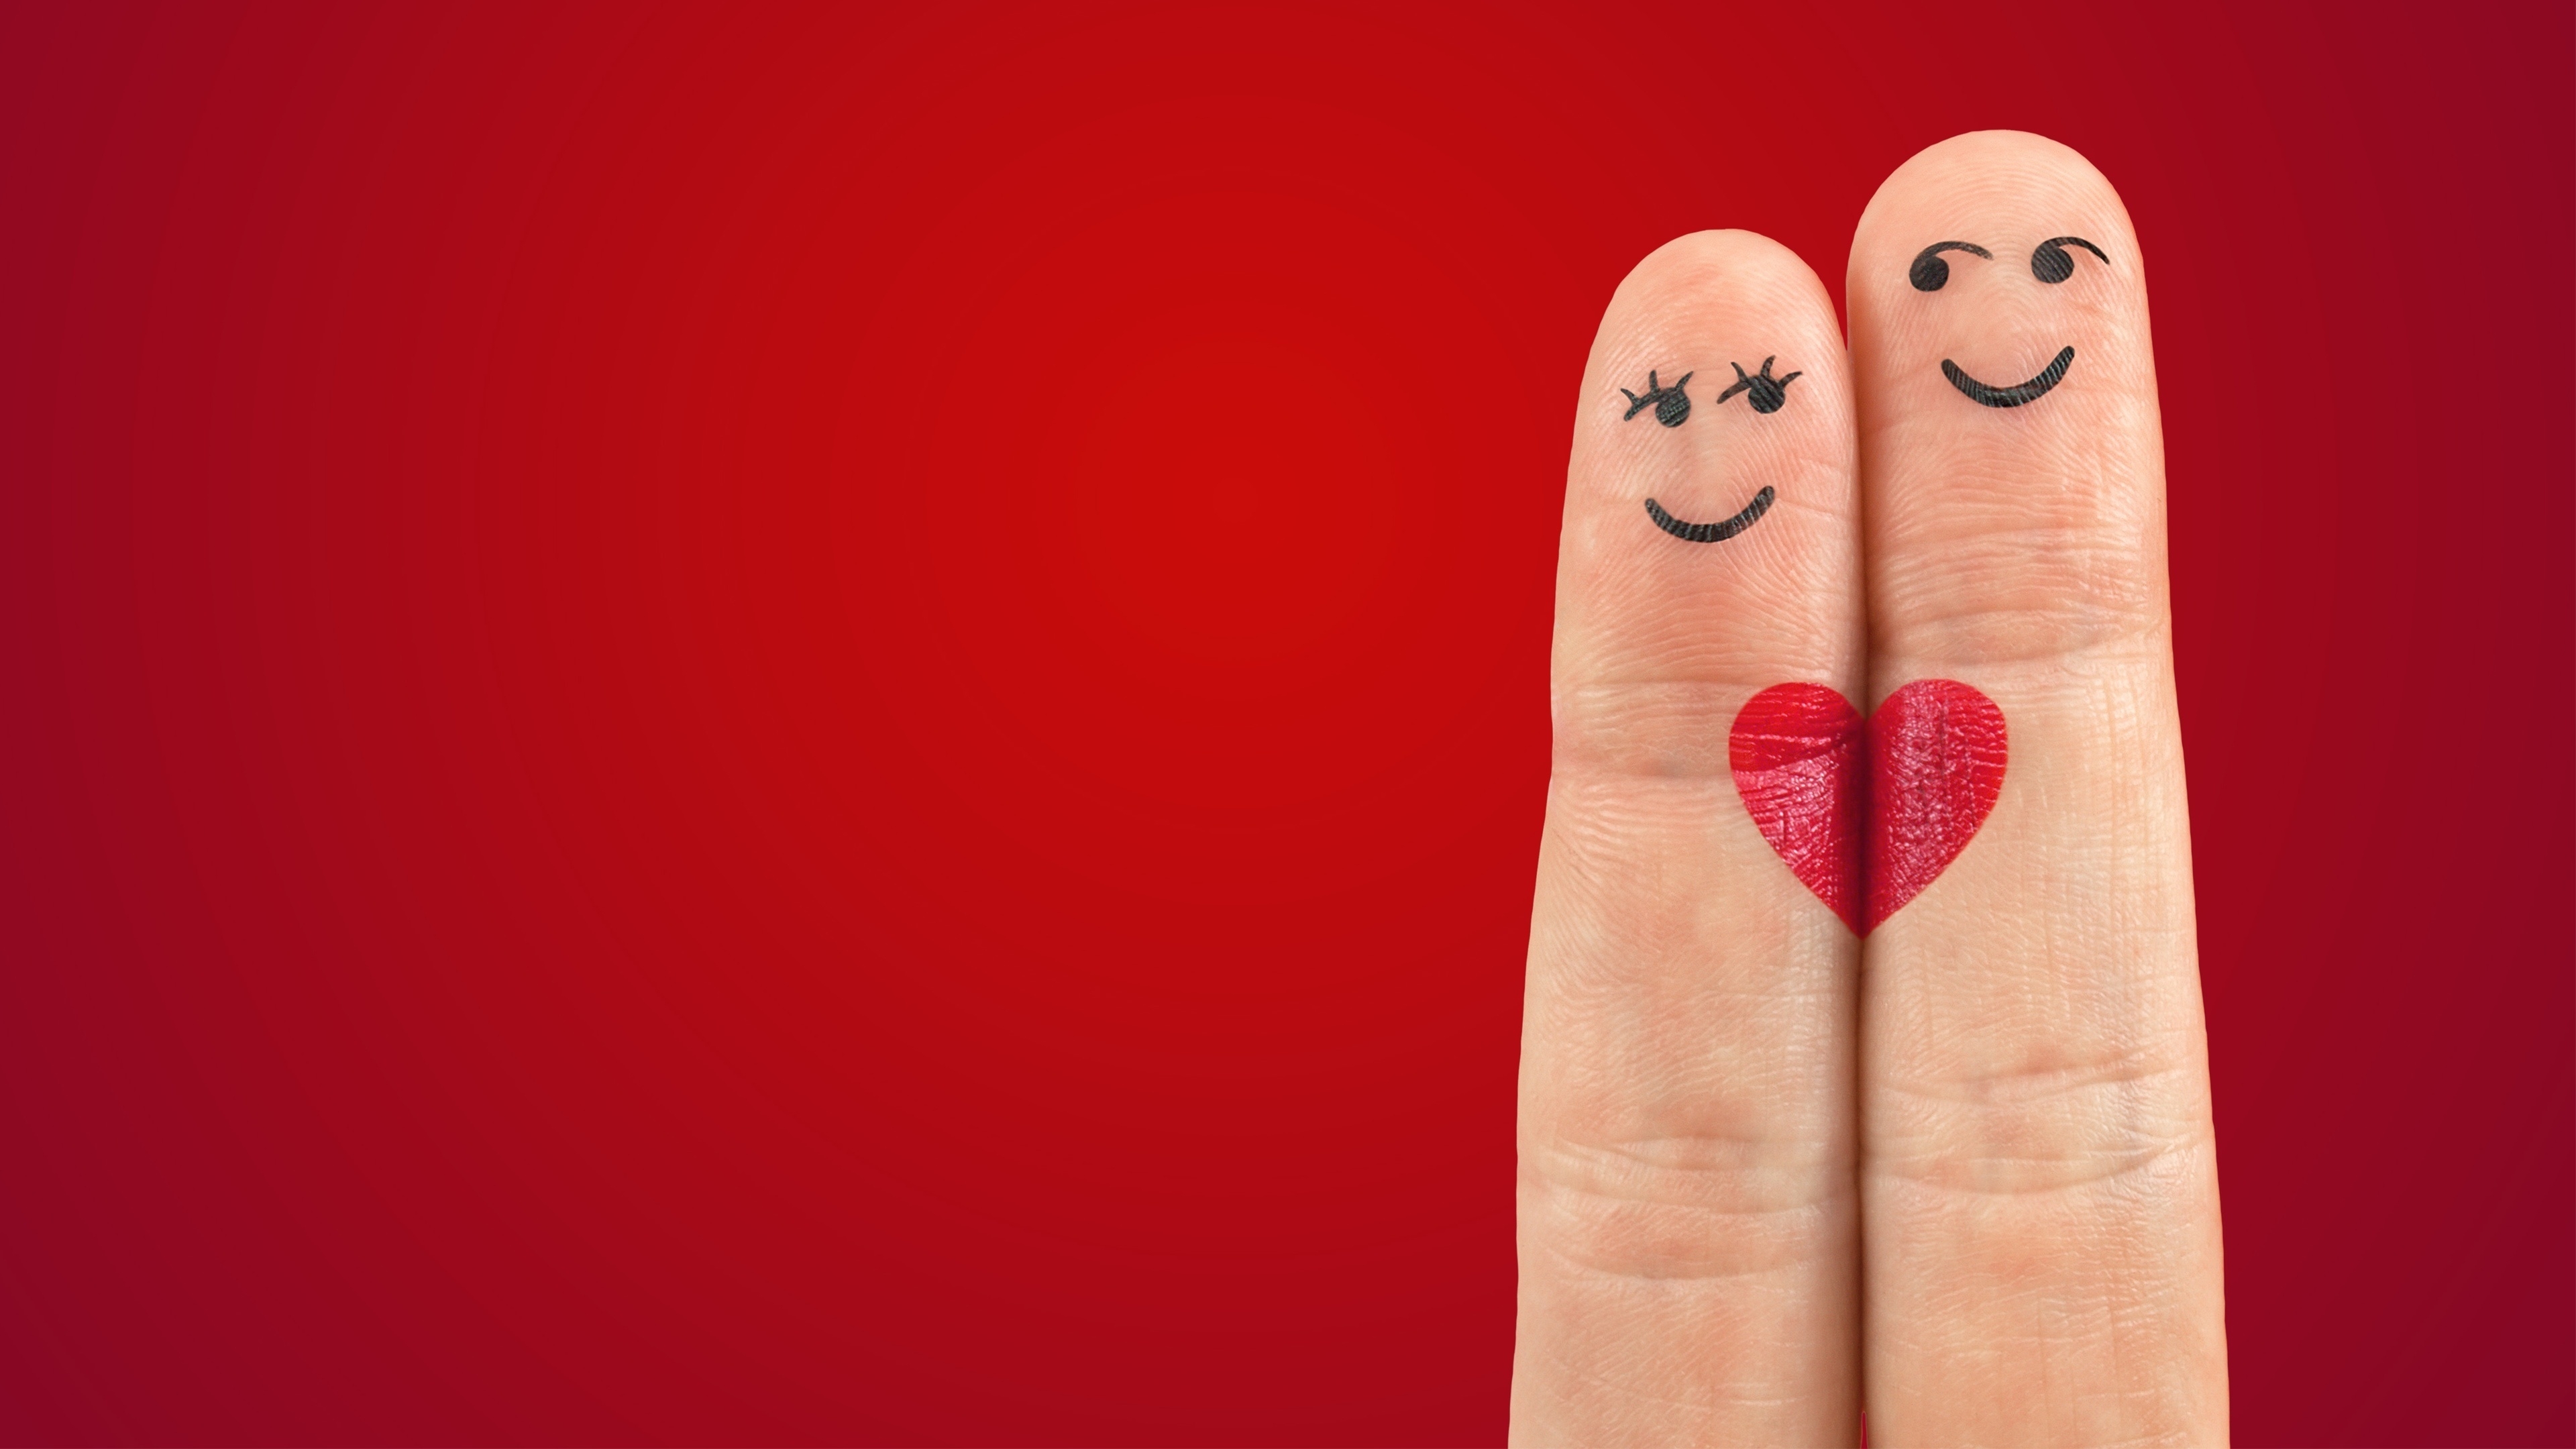 Love Fingers Valentines Days for 3840 x 2160 Ultra HD resolution